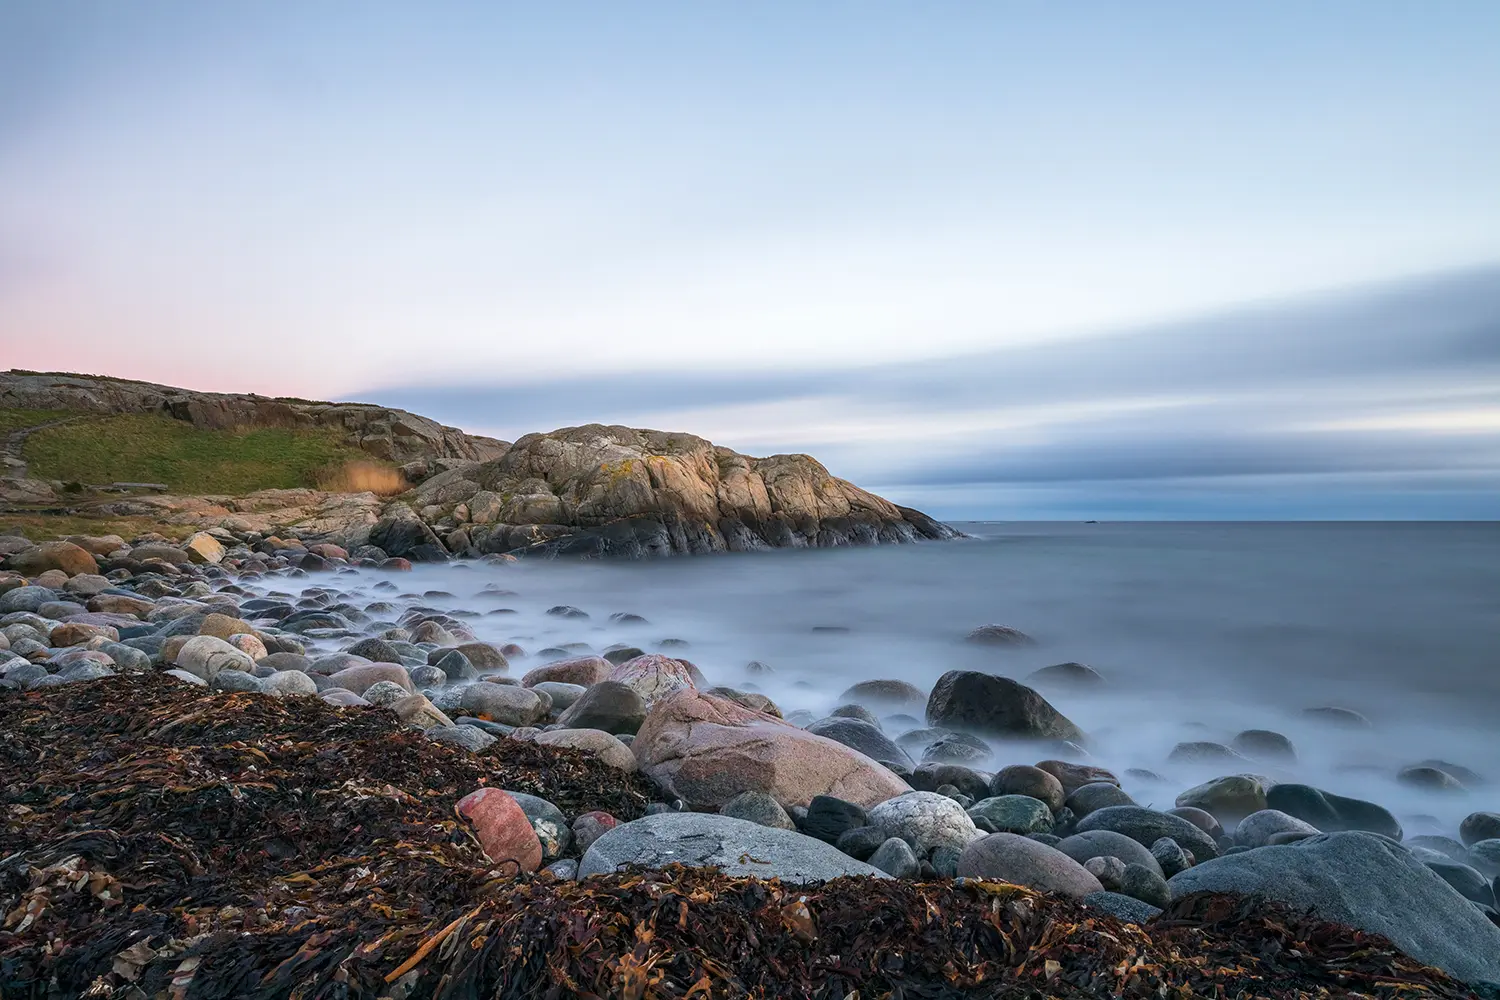 Pebble shore at Hove, Tromoy in Arendal, Norway. Raet National Park.